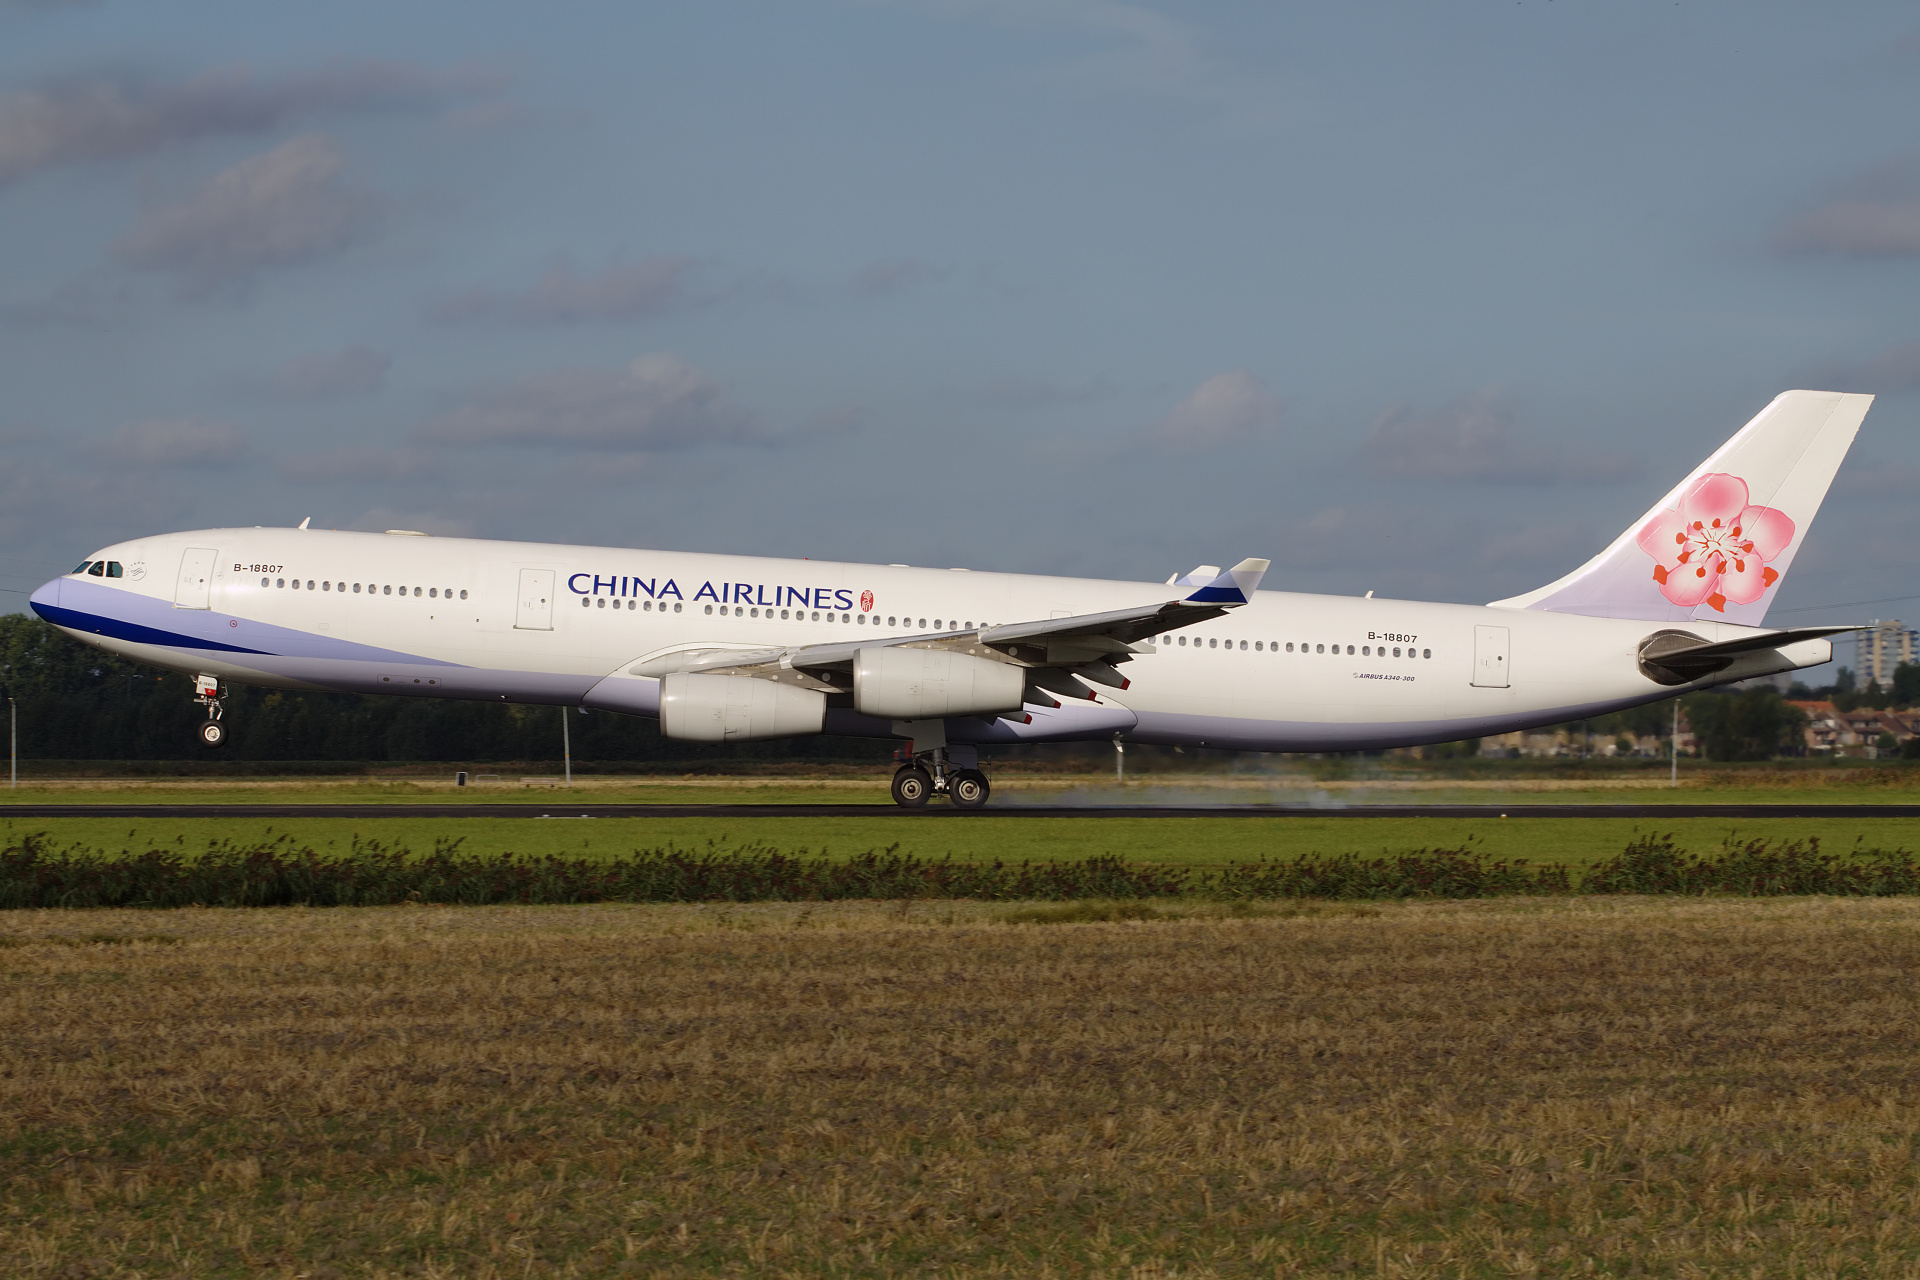 B-18807, China Airlines (Aircraft » Schiphol Spotting » Airbus A340-300)